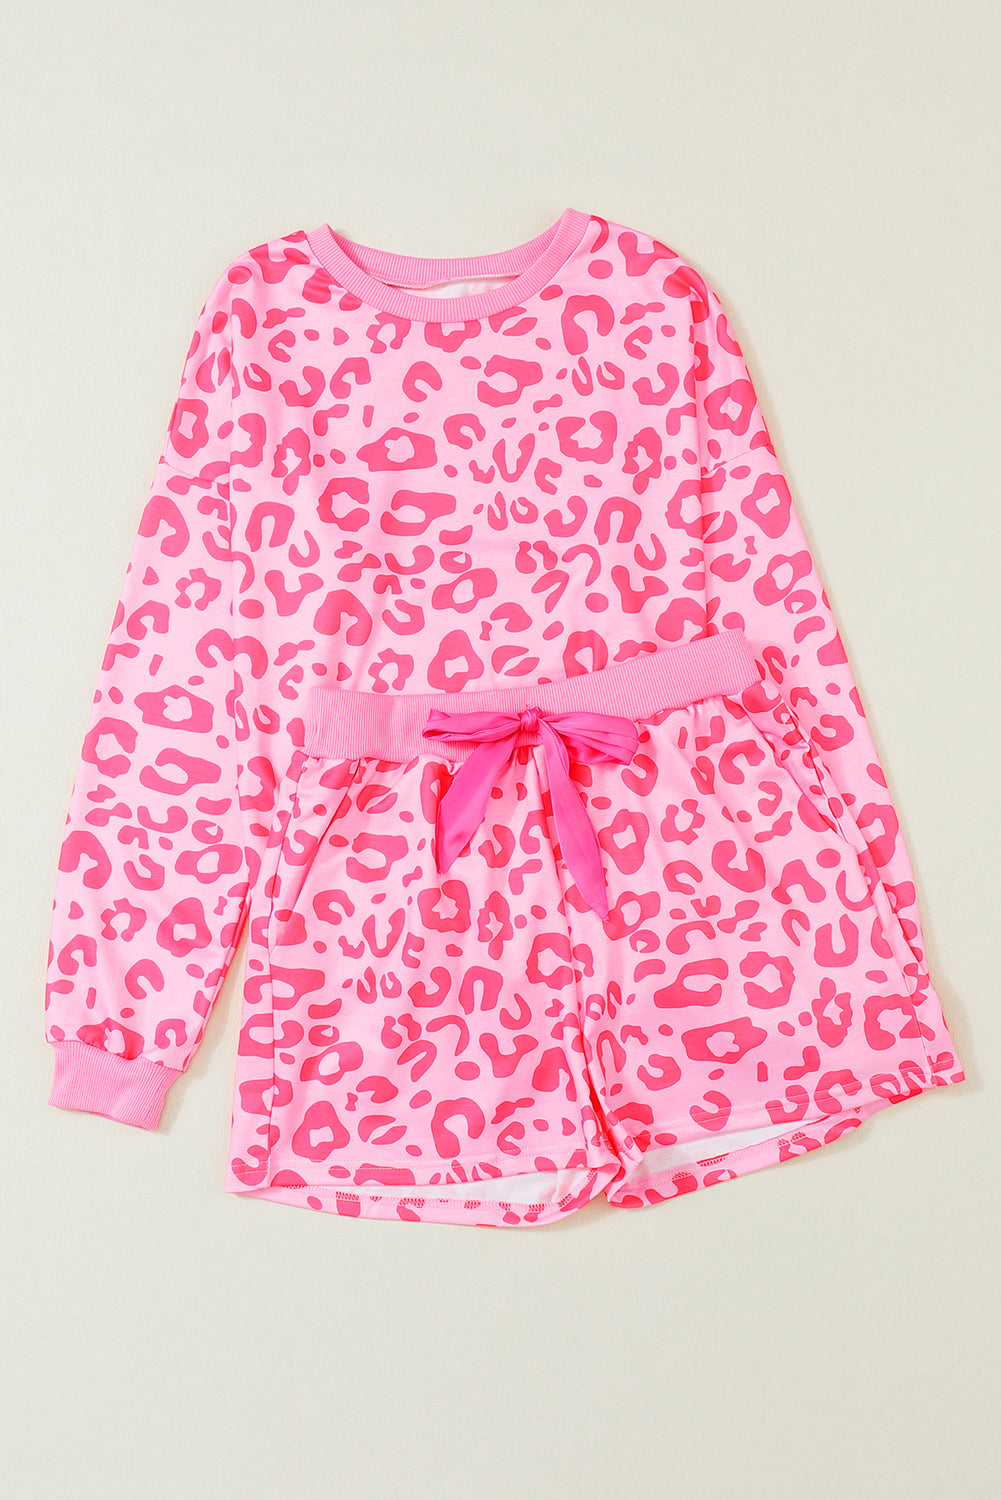 Pink Leopard Long Sleeve Satin Tie Shorts Two Piece Set